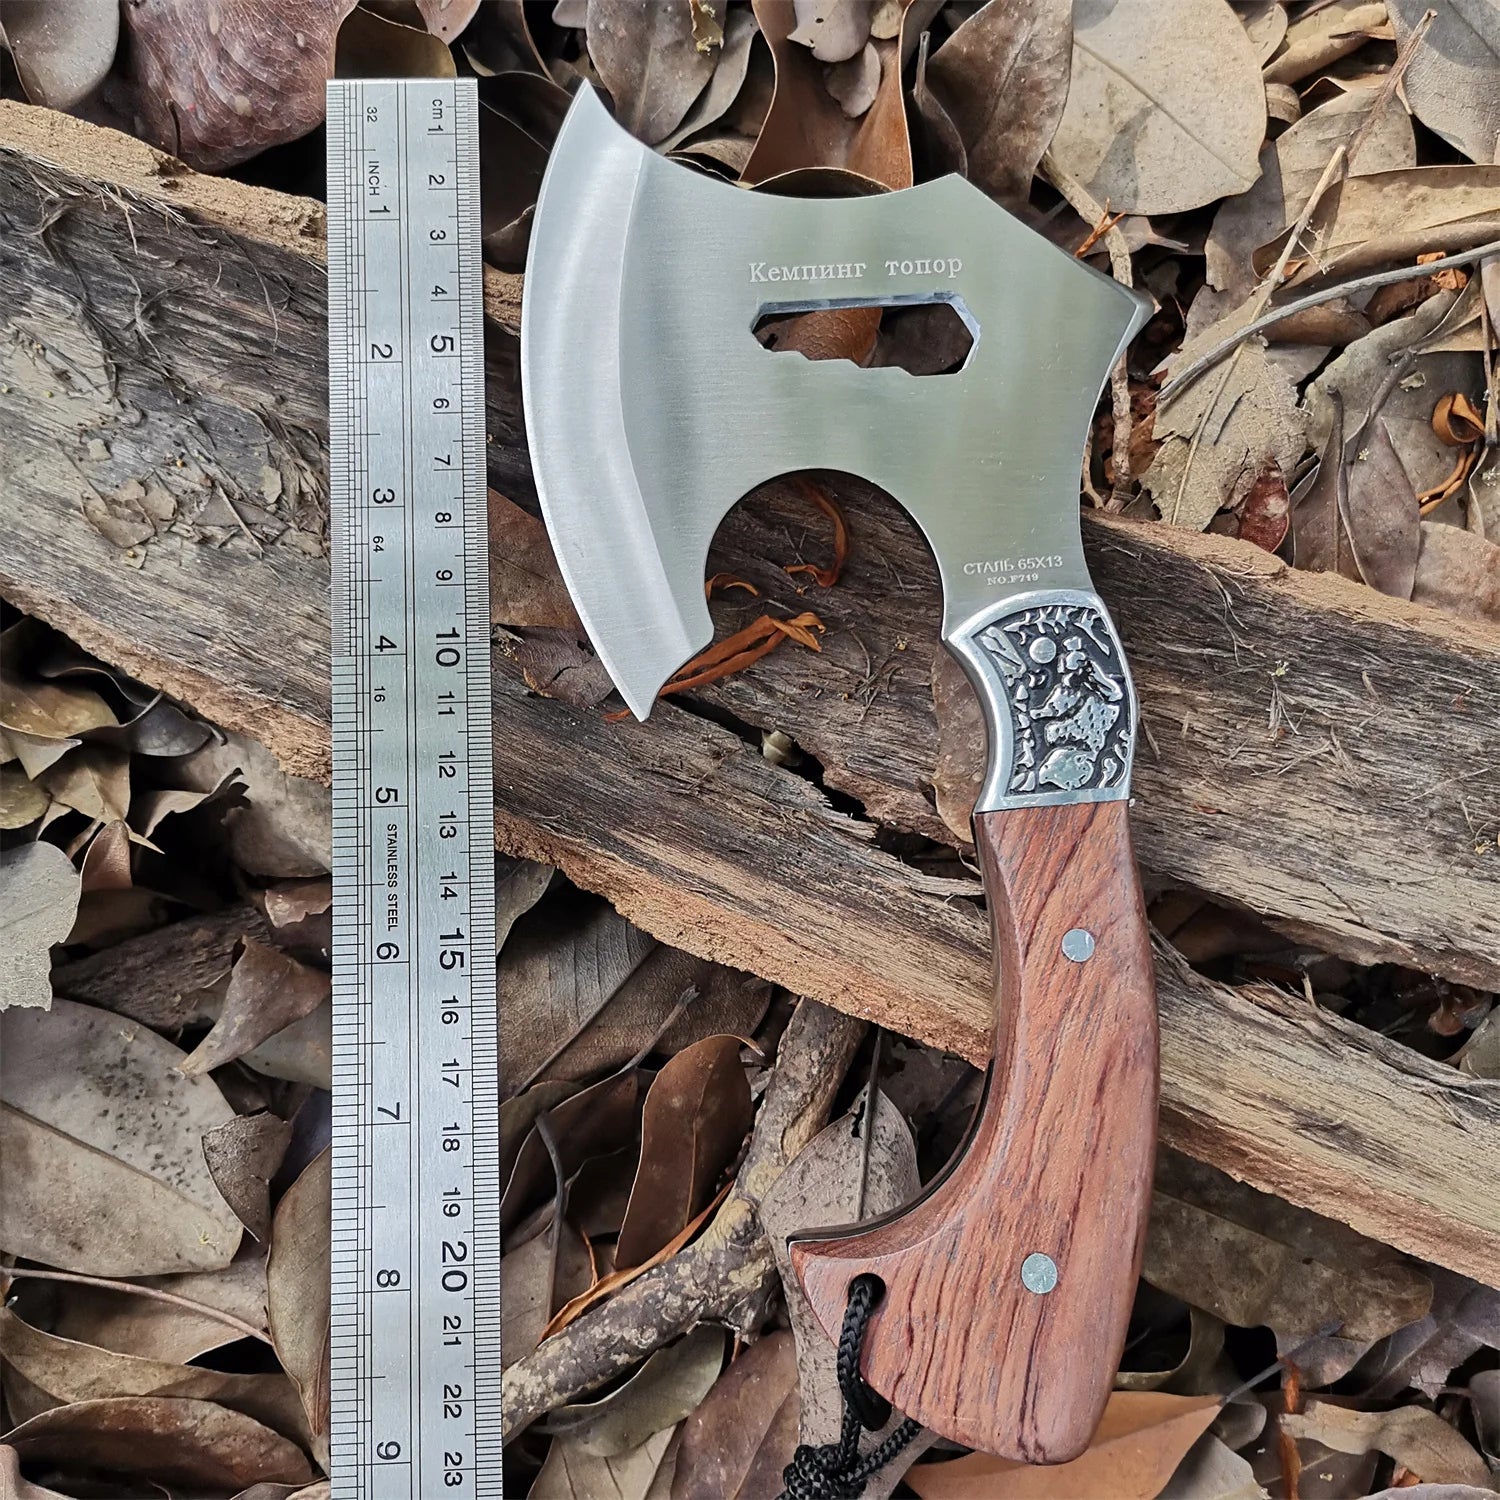 DB Axe Garden Tool - Compact Camping and Survival Hatchet with Sheath Tomahawk Army Outdoor Hunting Camping Survival Machete Axe